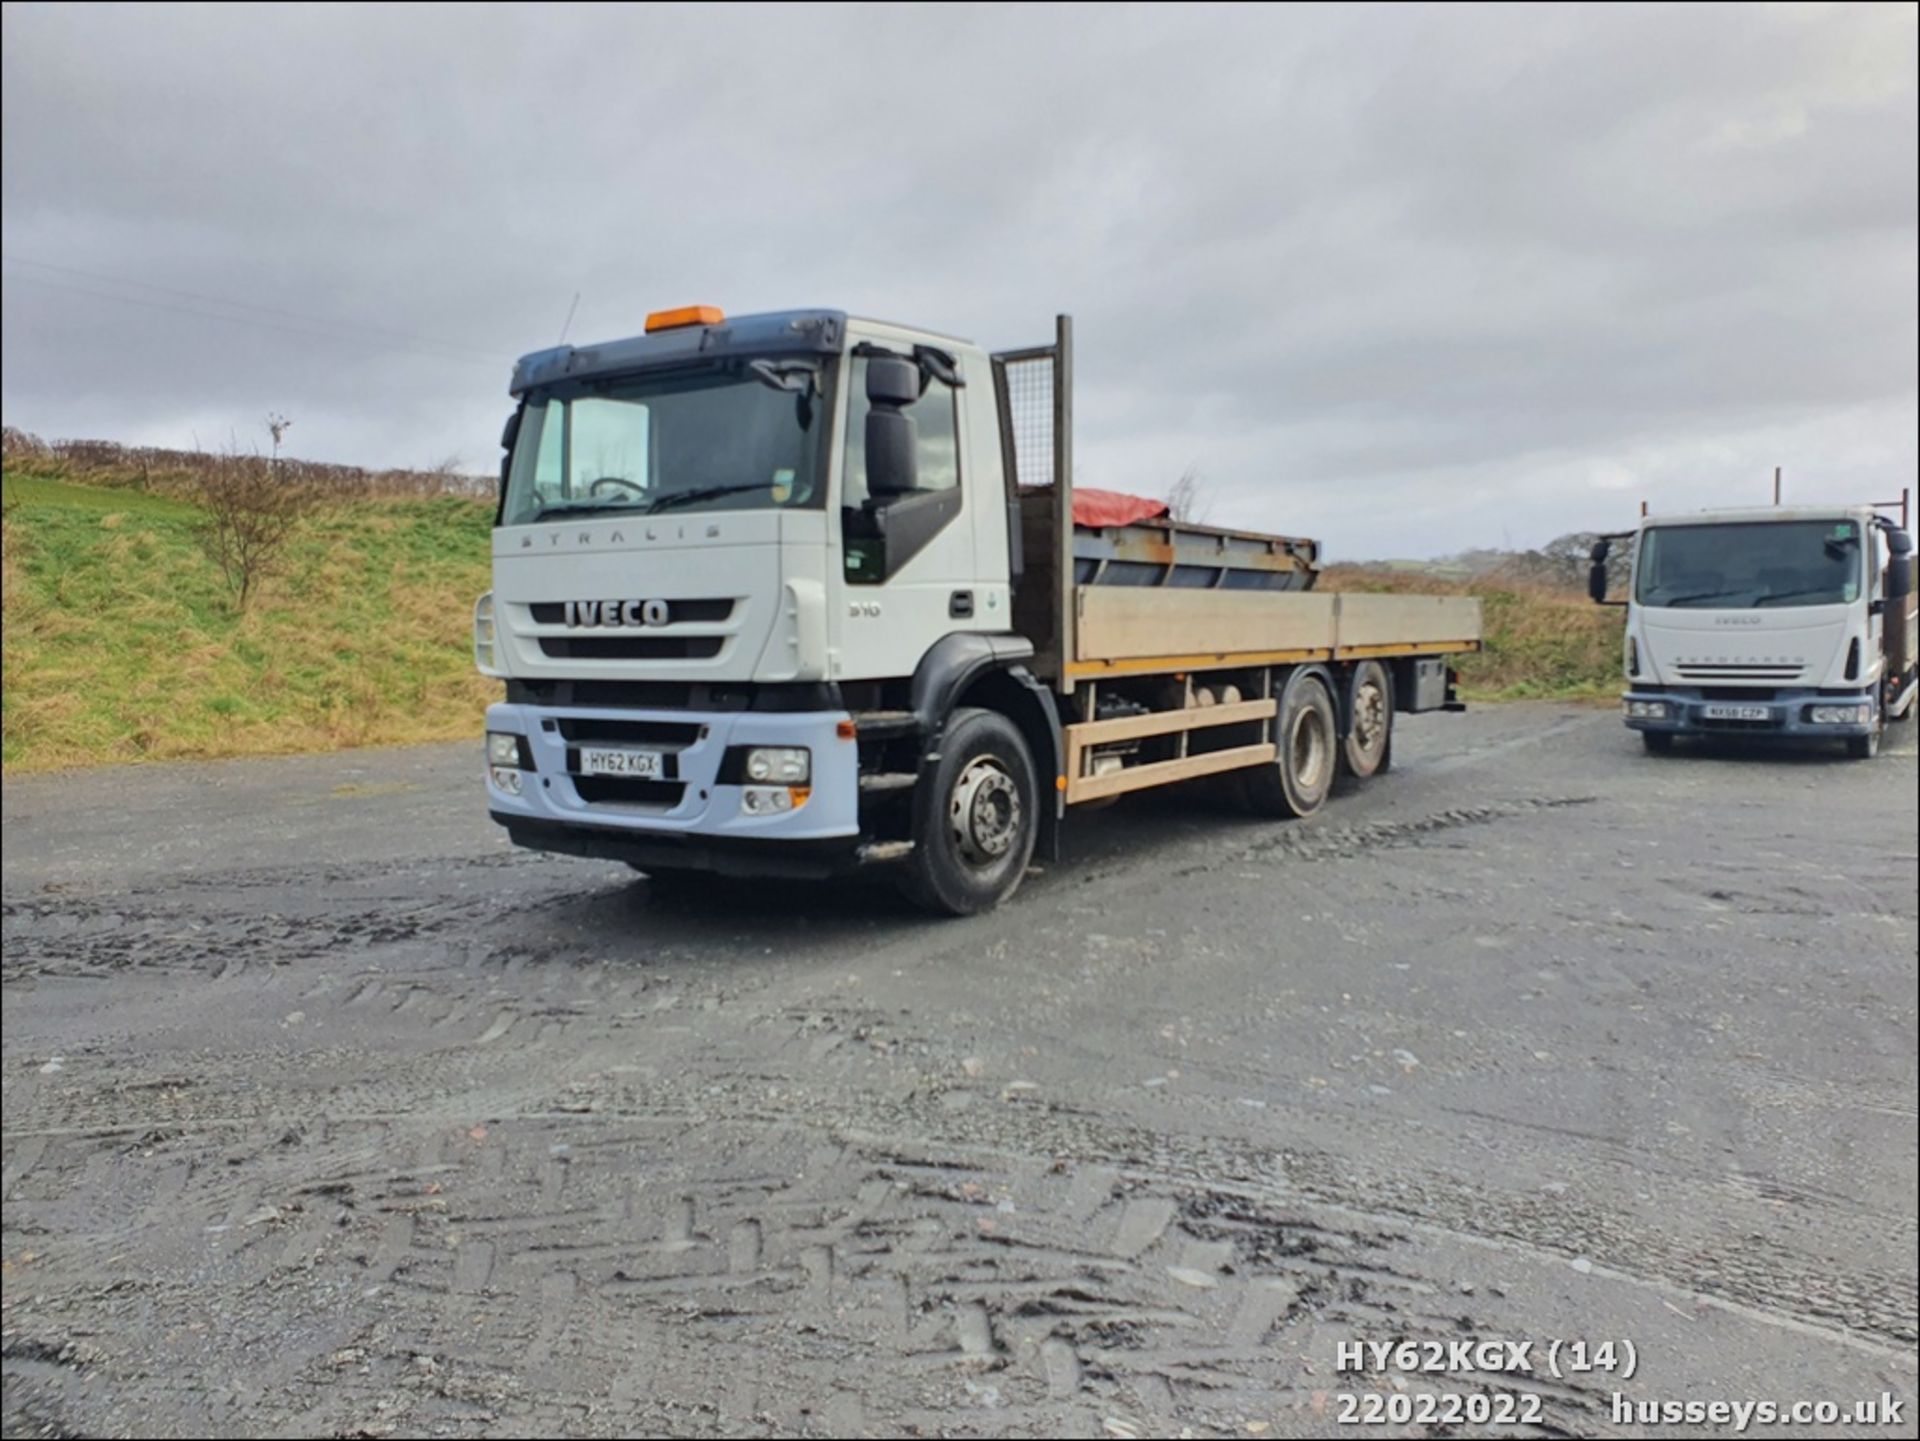 12/62 IVECO STRALIS - 7790cc 2dr Flat Bed (White) - Image 17 of 28